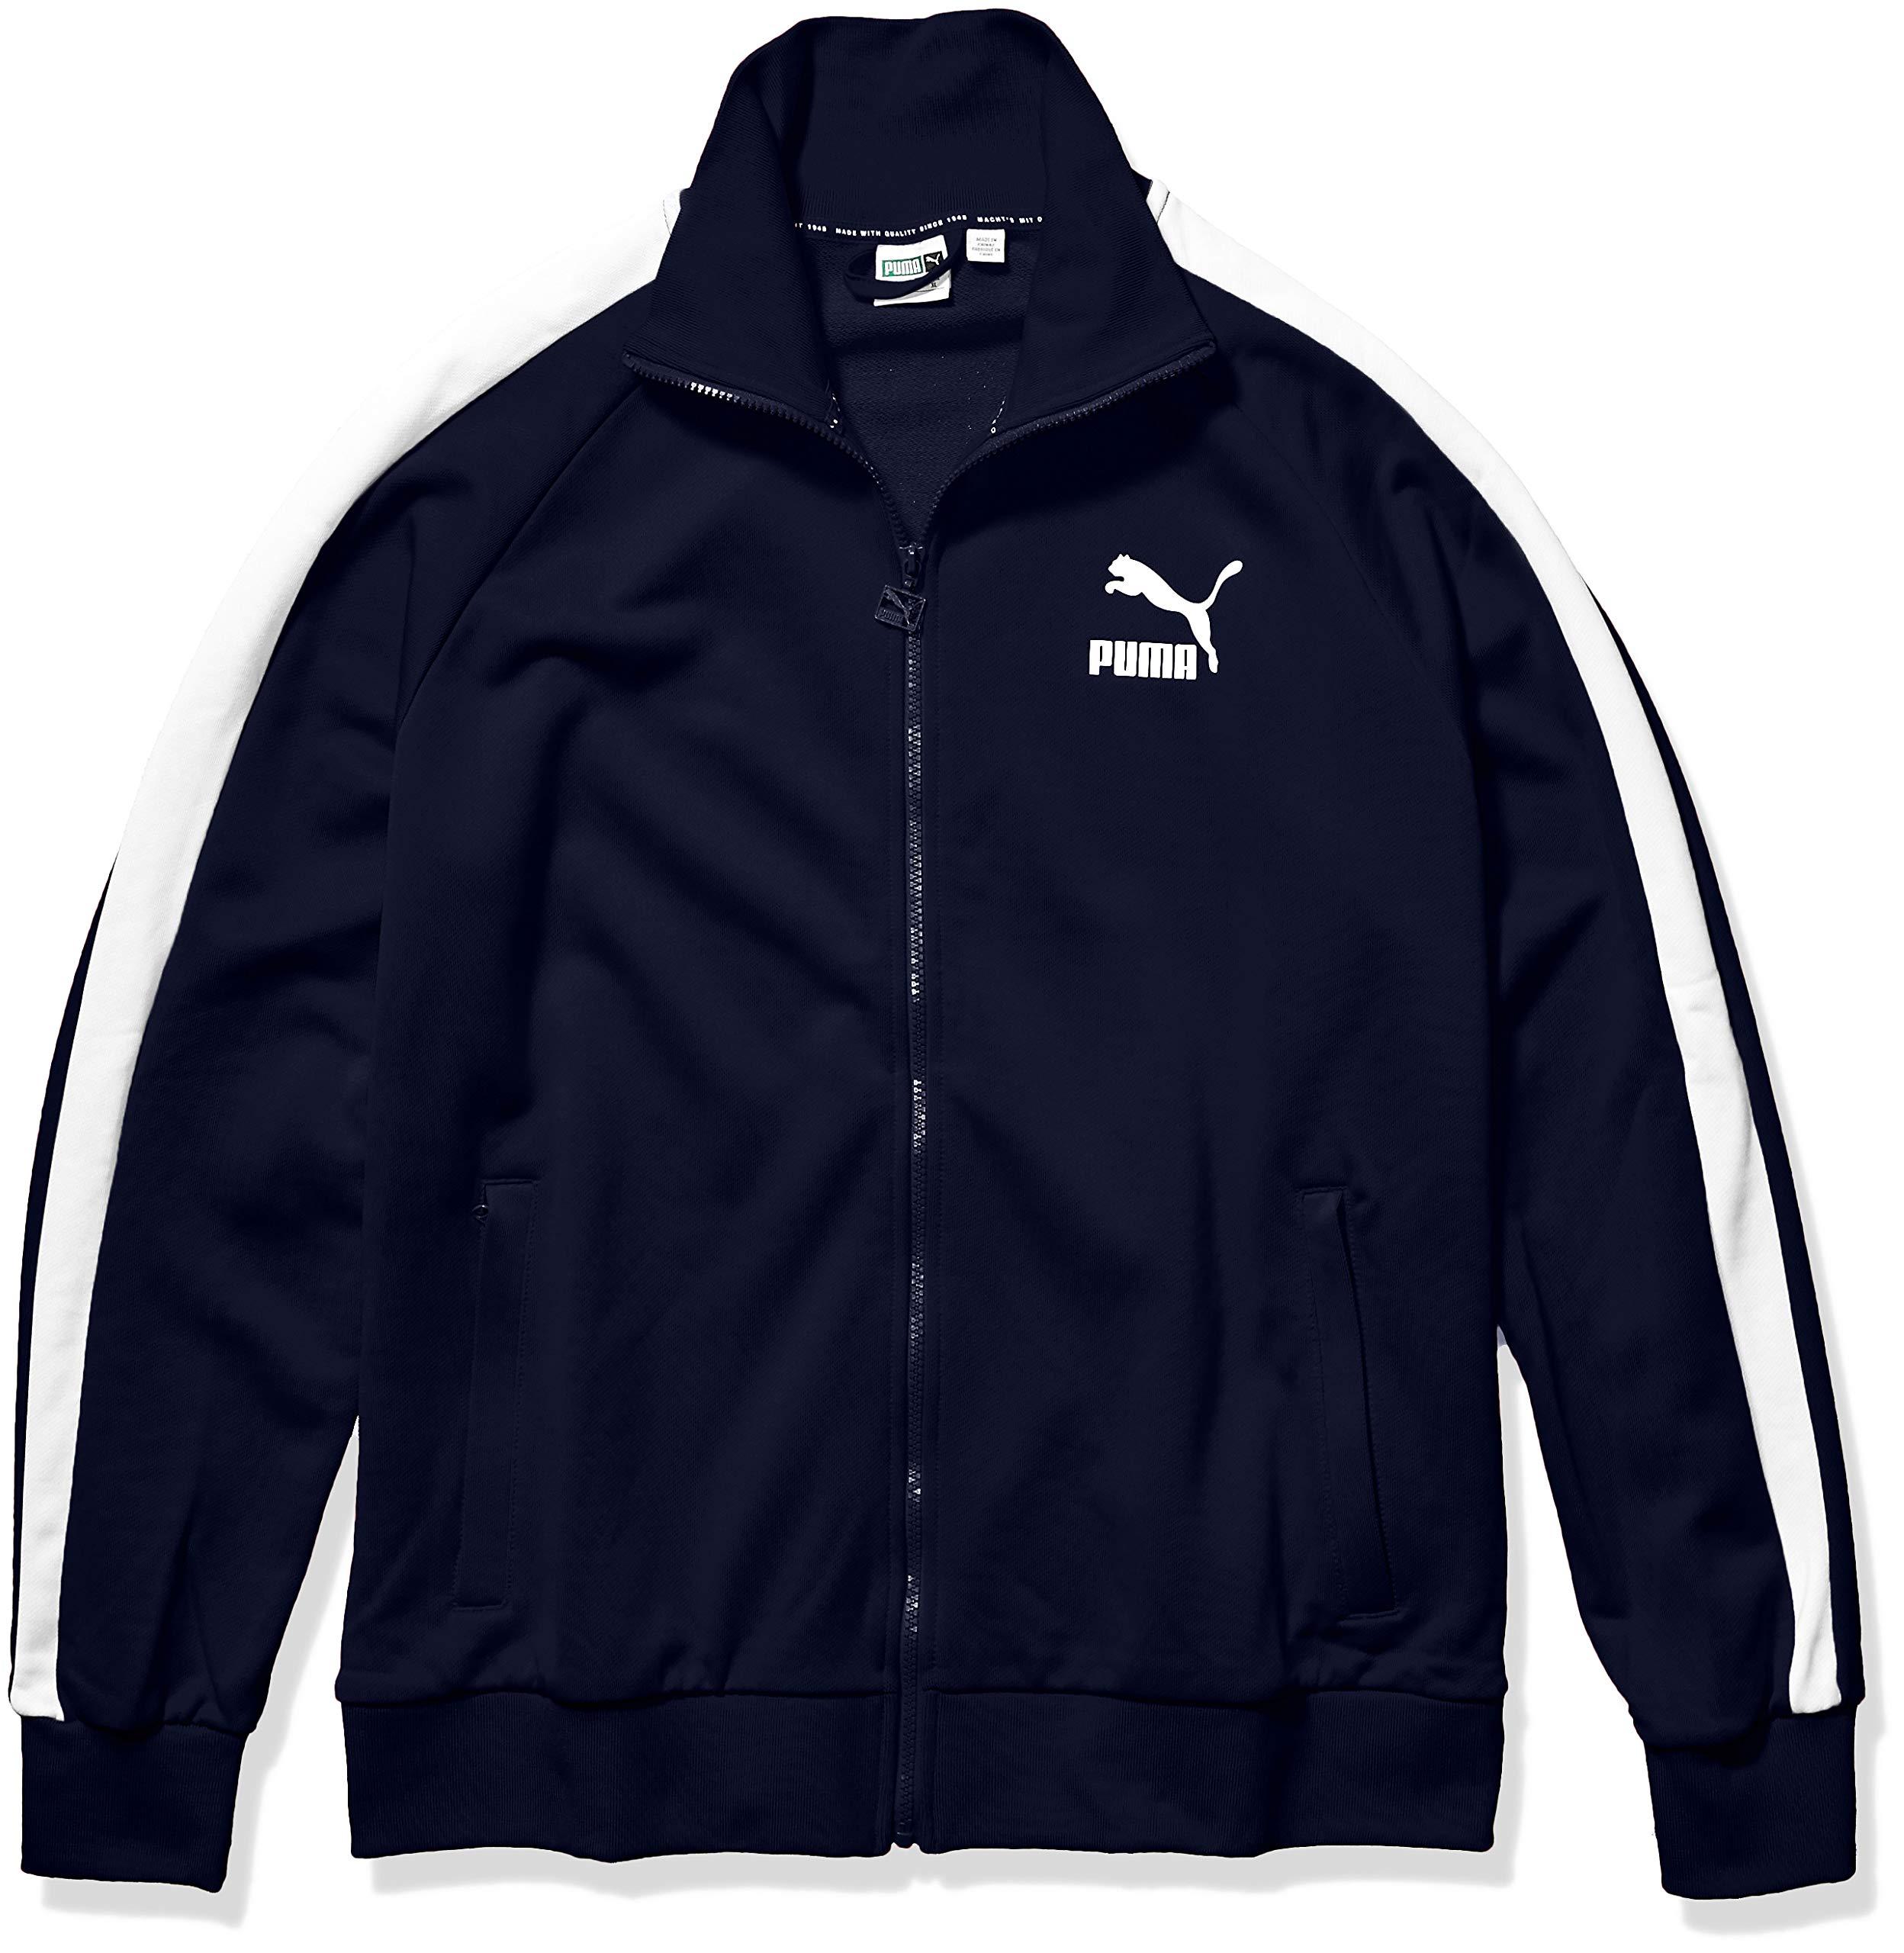 PUMA Cotton Jacket in Blue for Men - Save 27% - Lyst